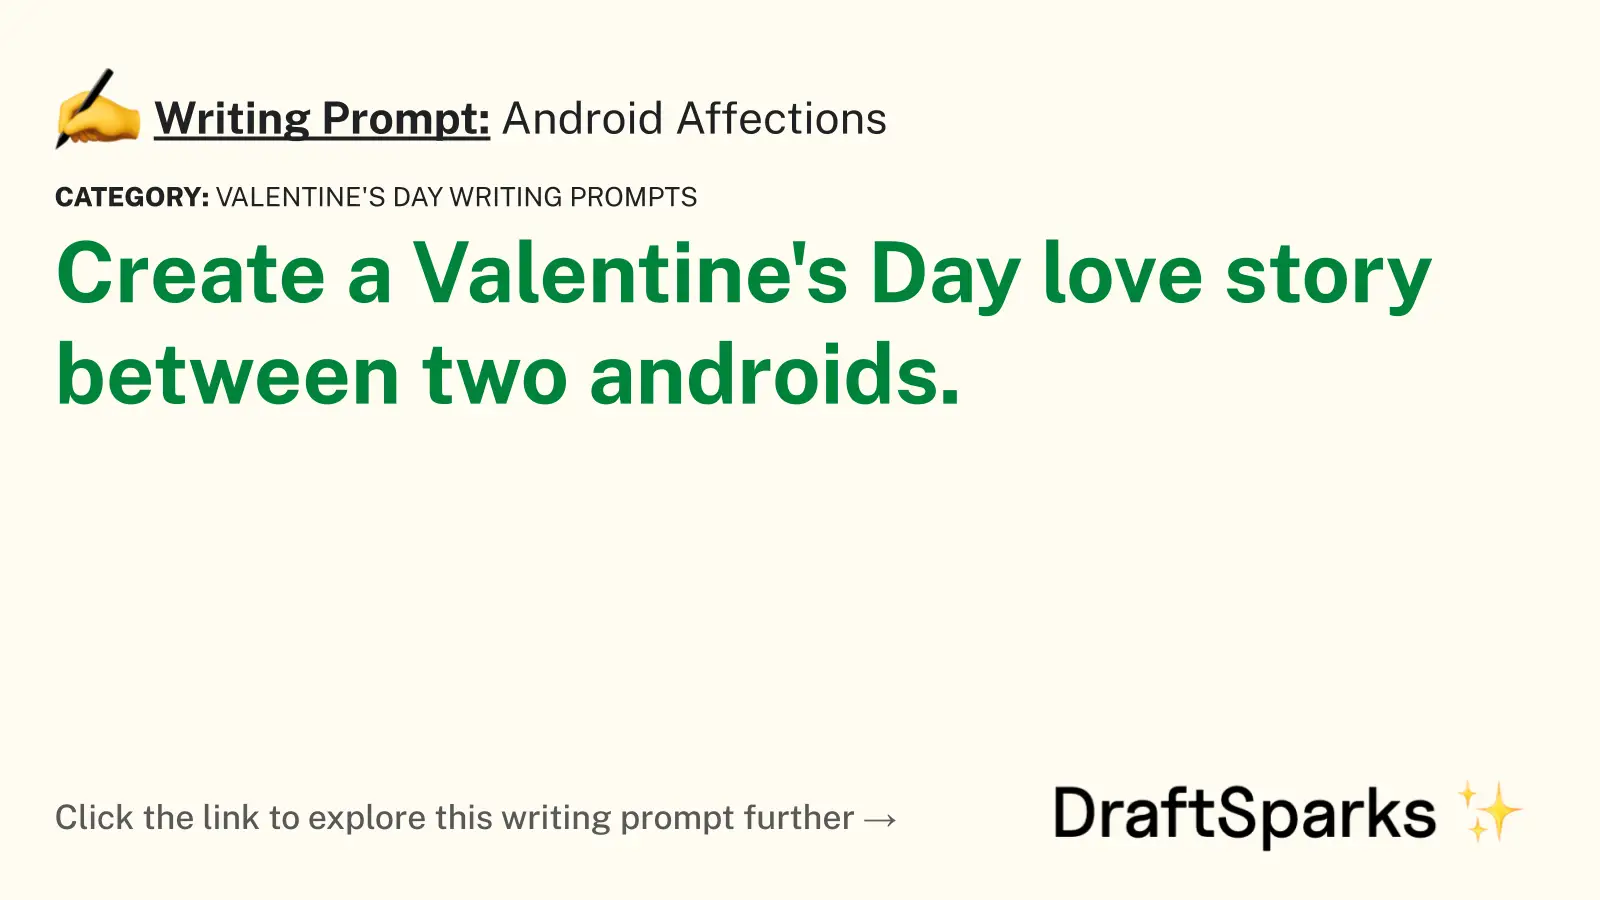 Android Affections